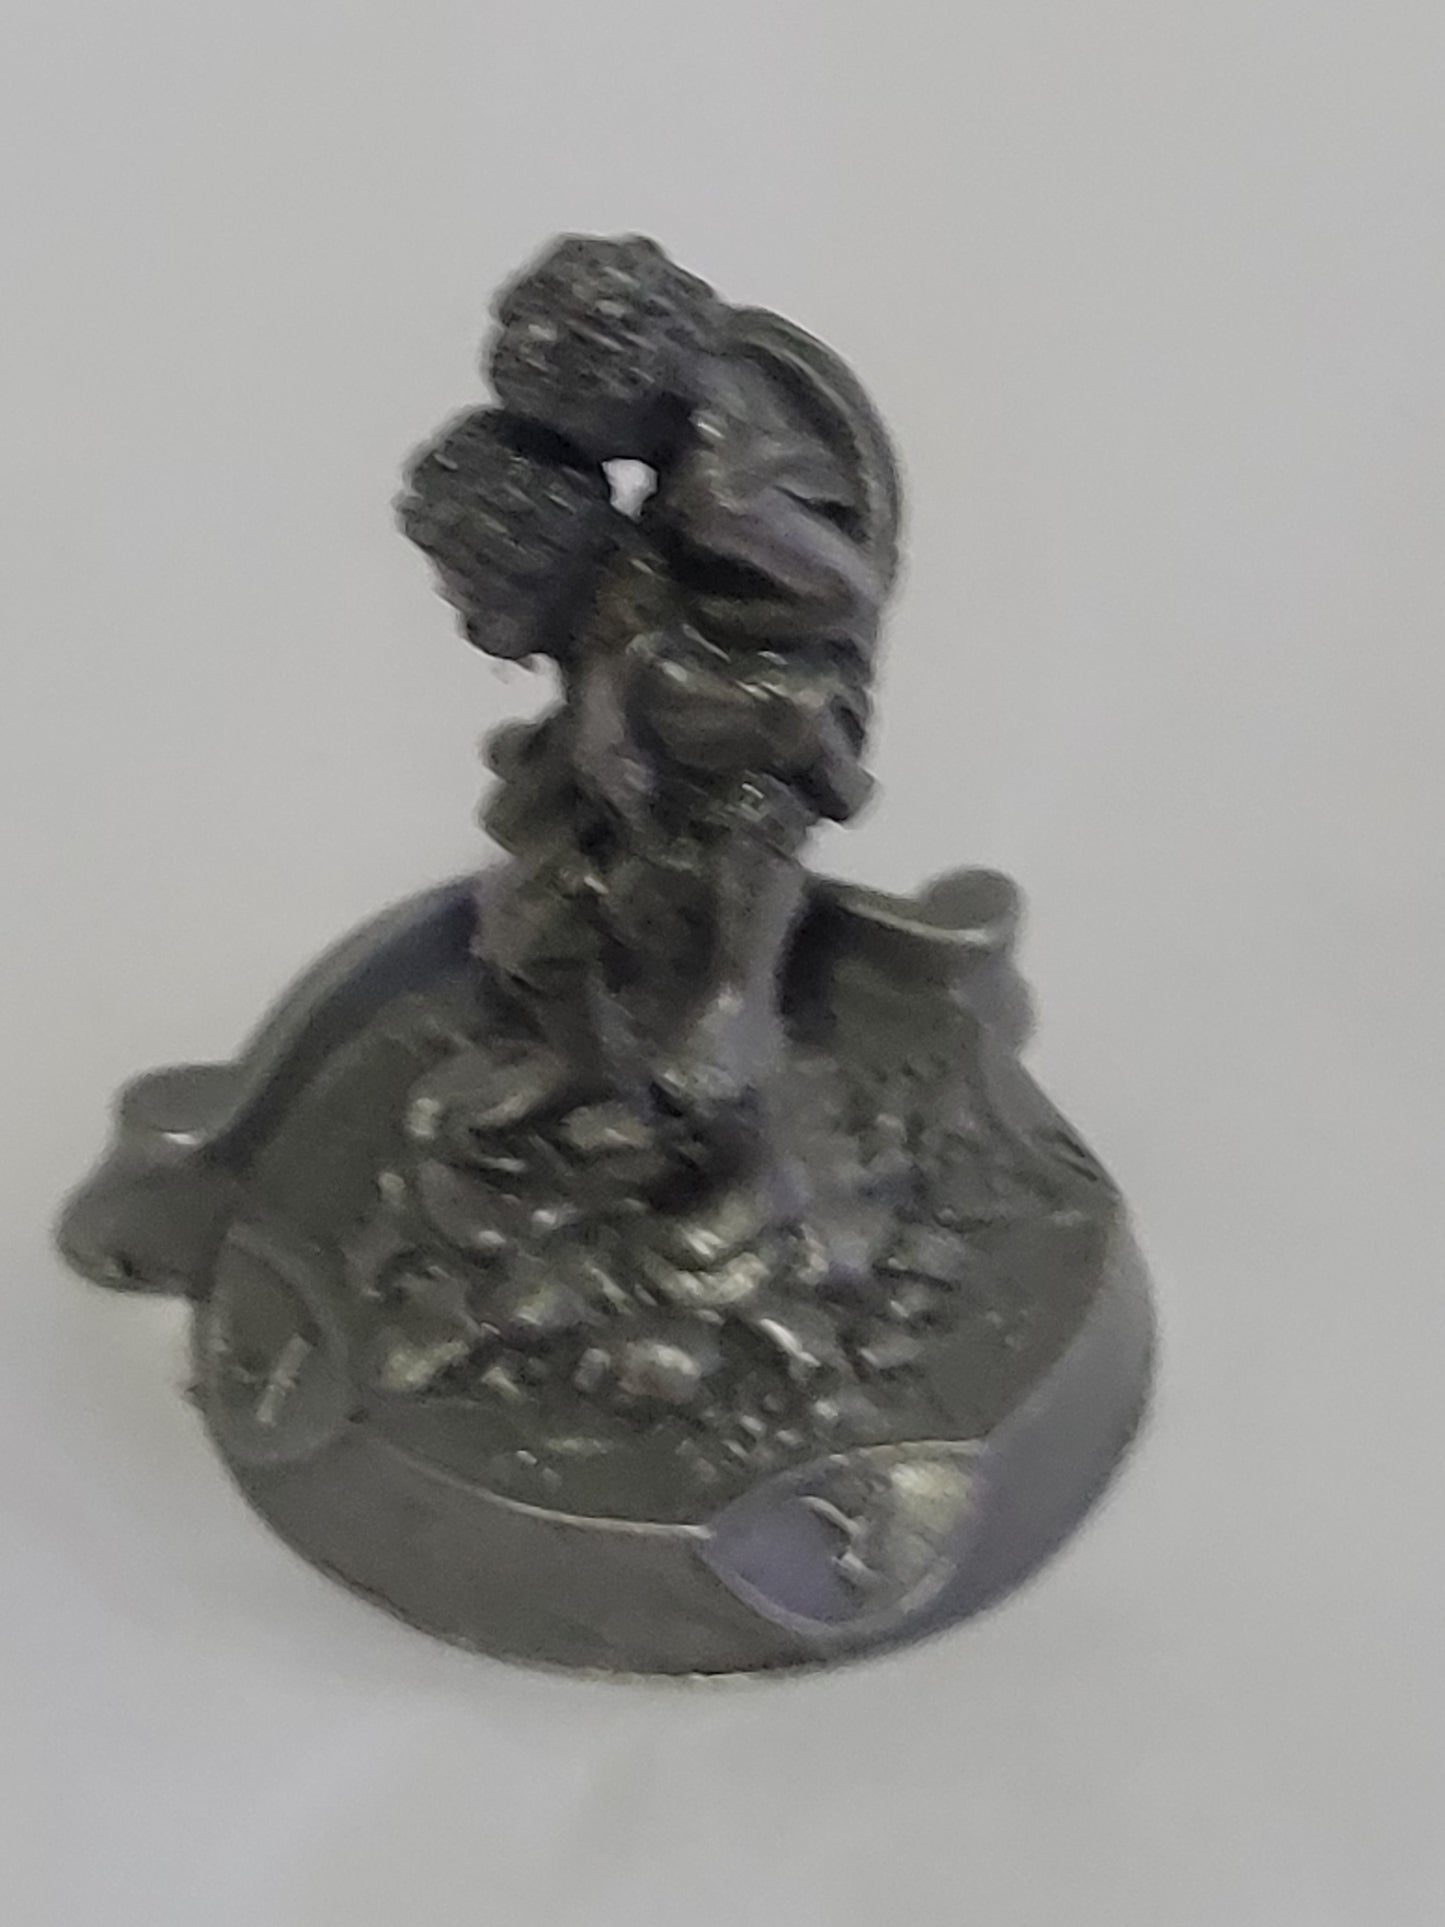 Mt. Doom from the Lord of the Rings by Rawcliffe, Pewter Figurine